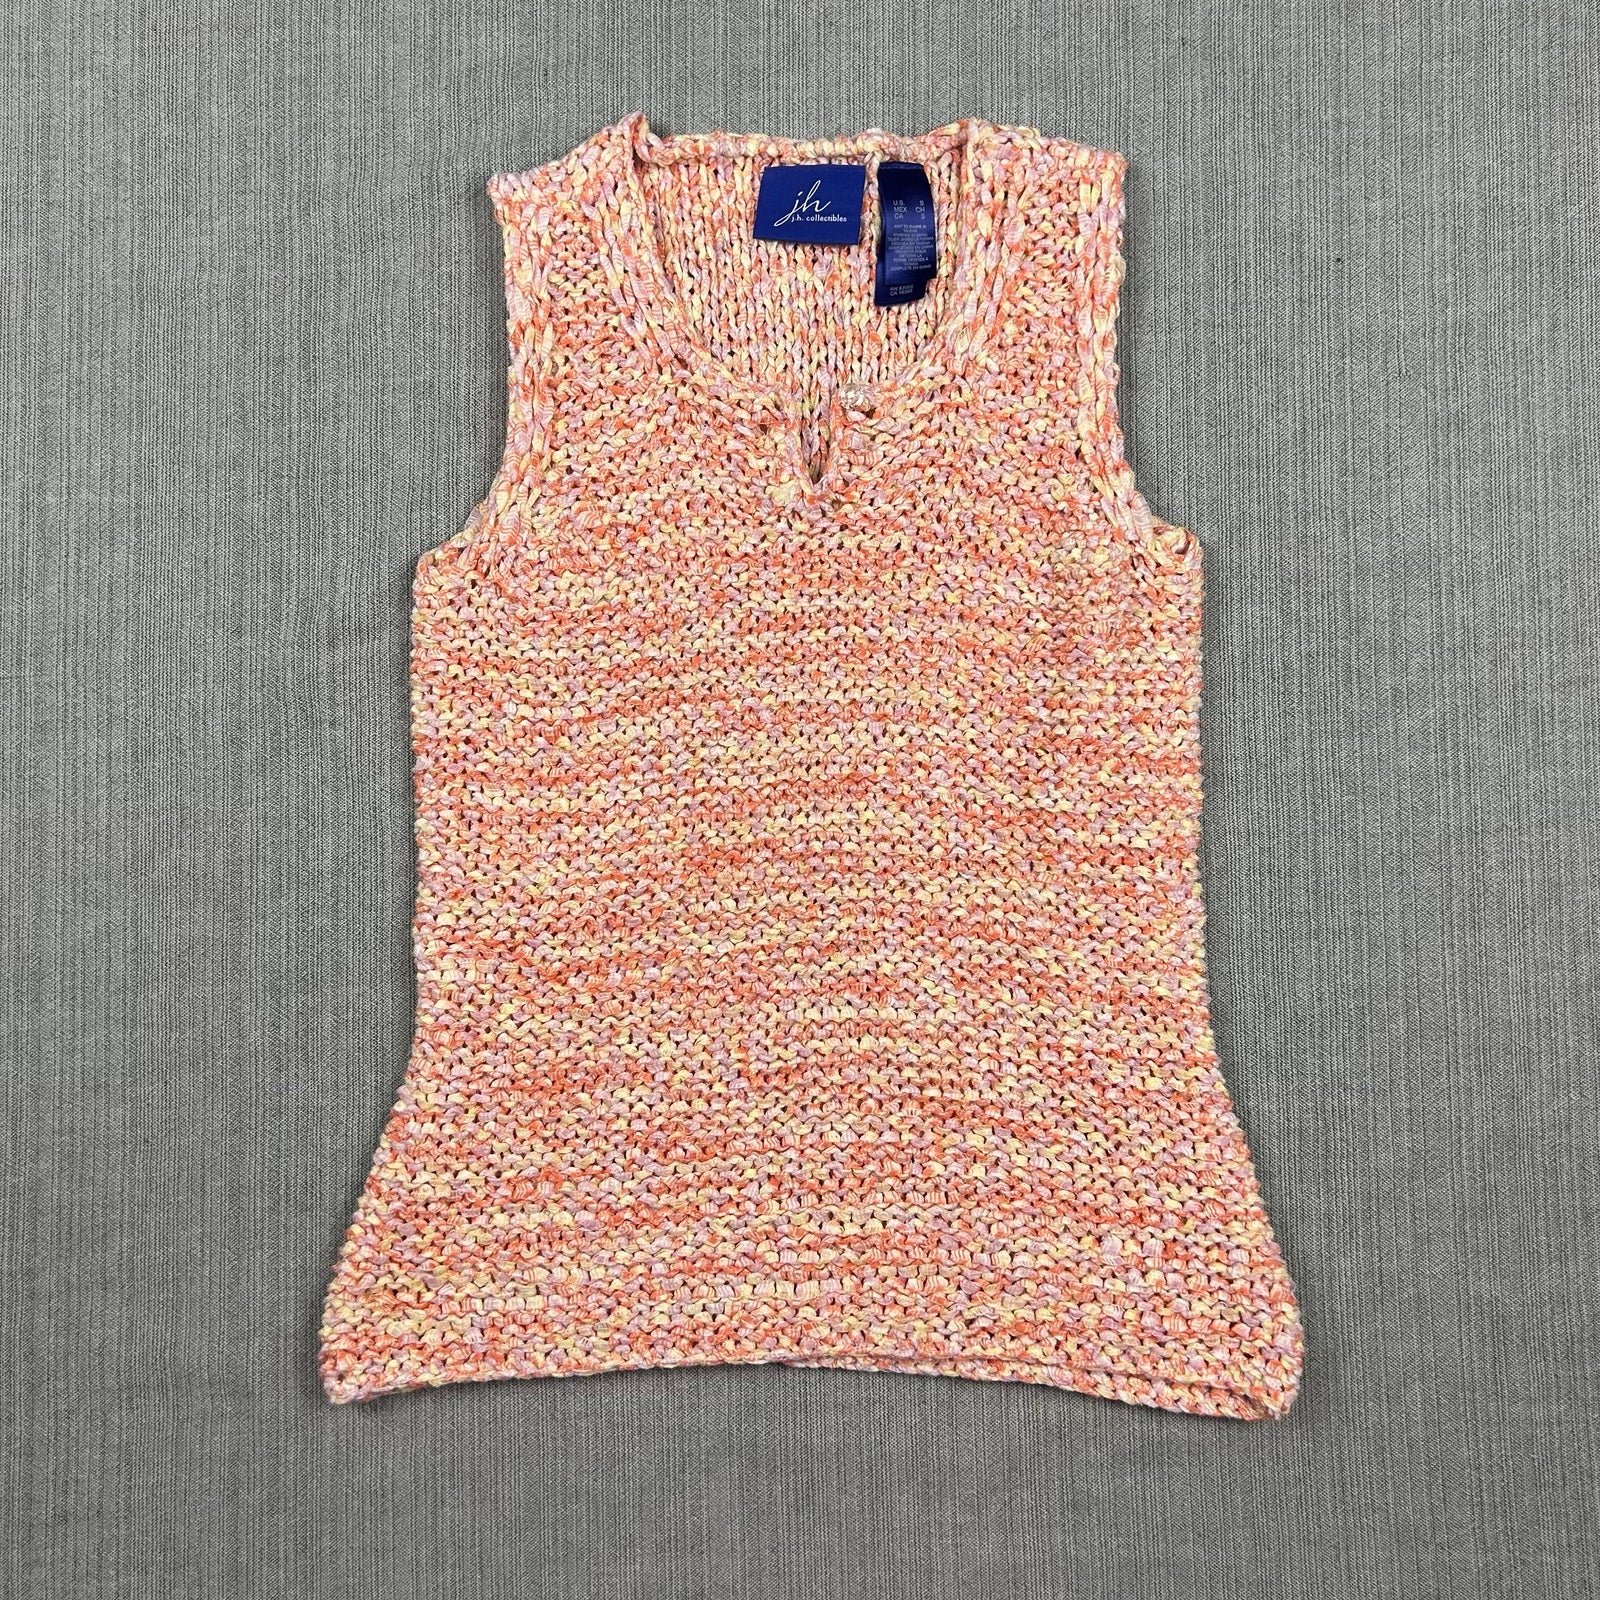 Beautiful JH Collectibles pink knitted tank top size s 